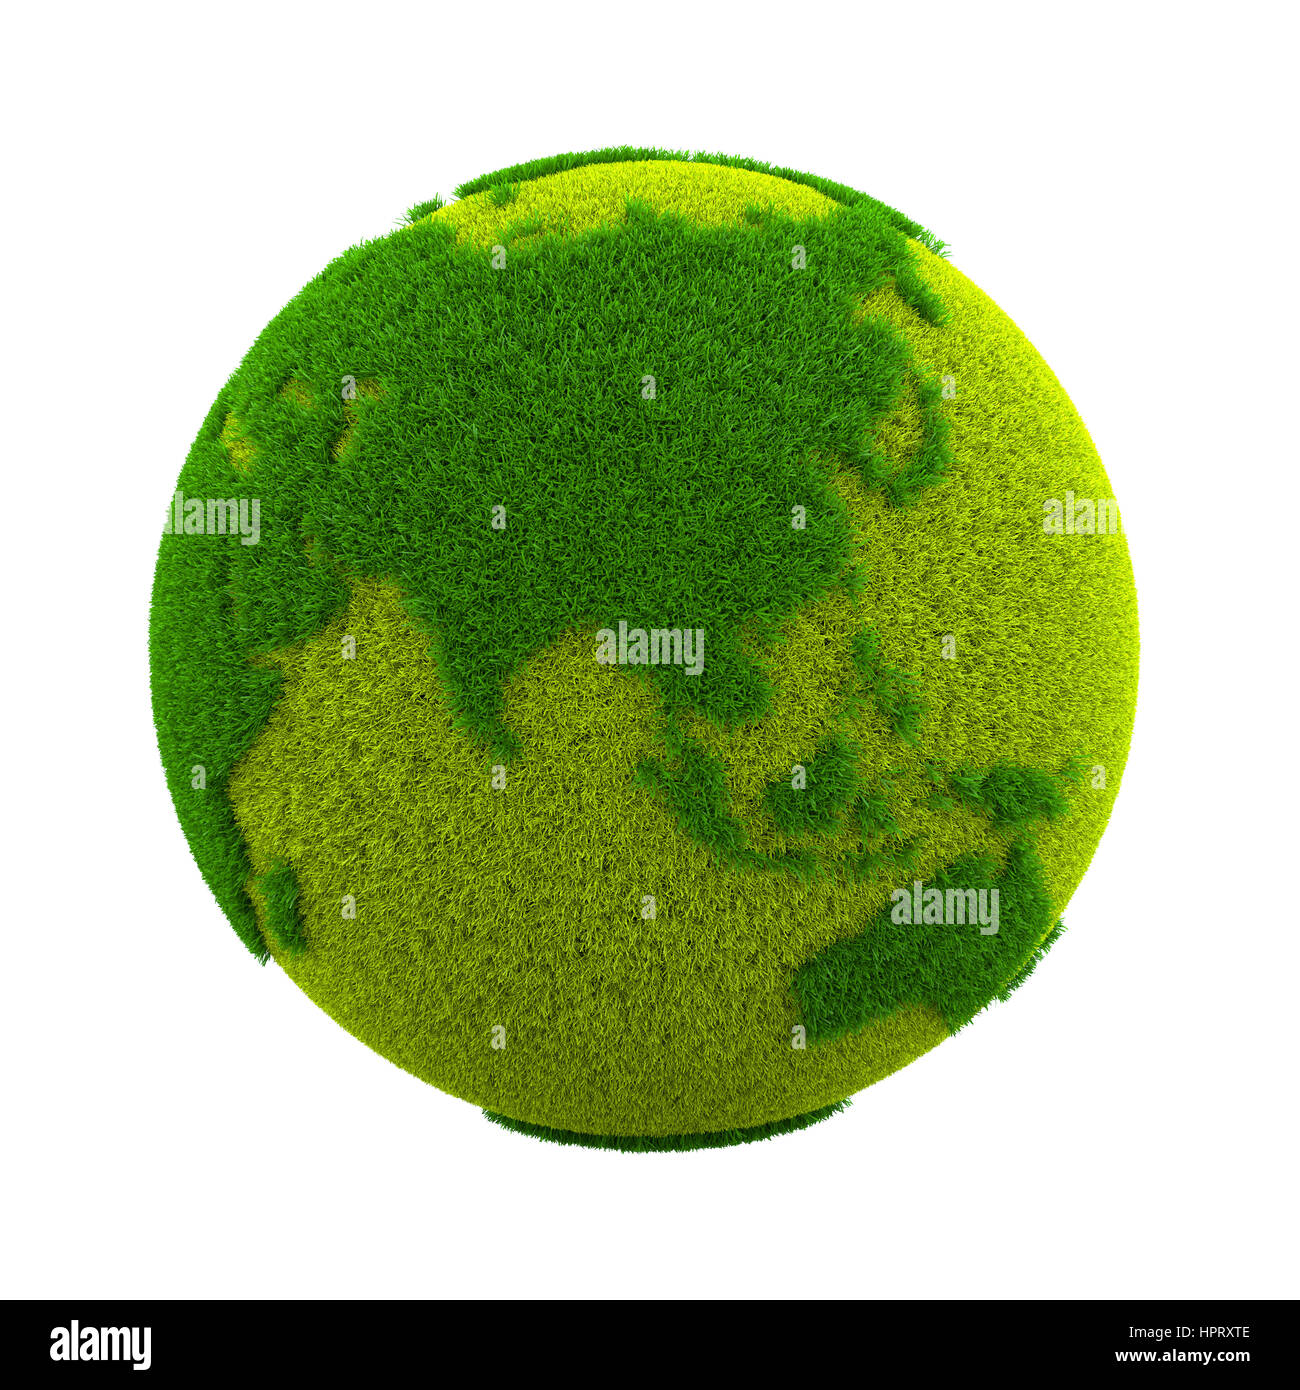 Grassy Green Earth Planet Asian Side Isolated on White Background 3D Illustration Stock Photo